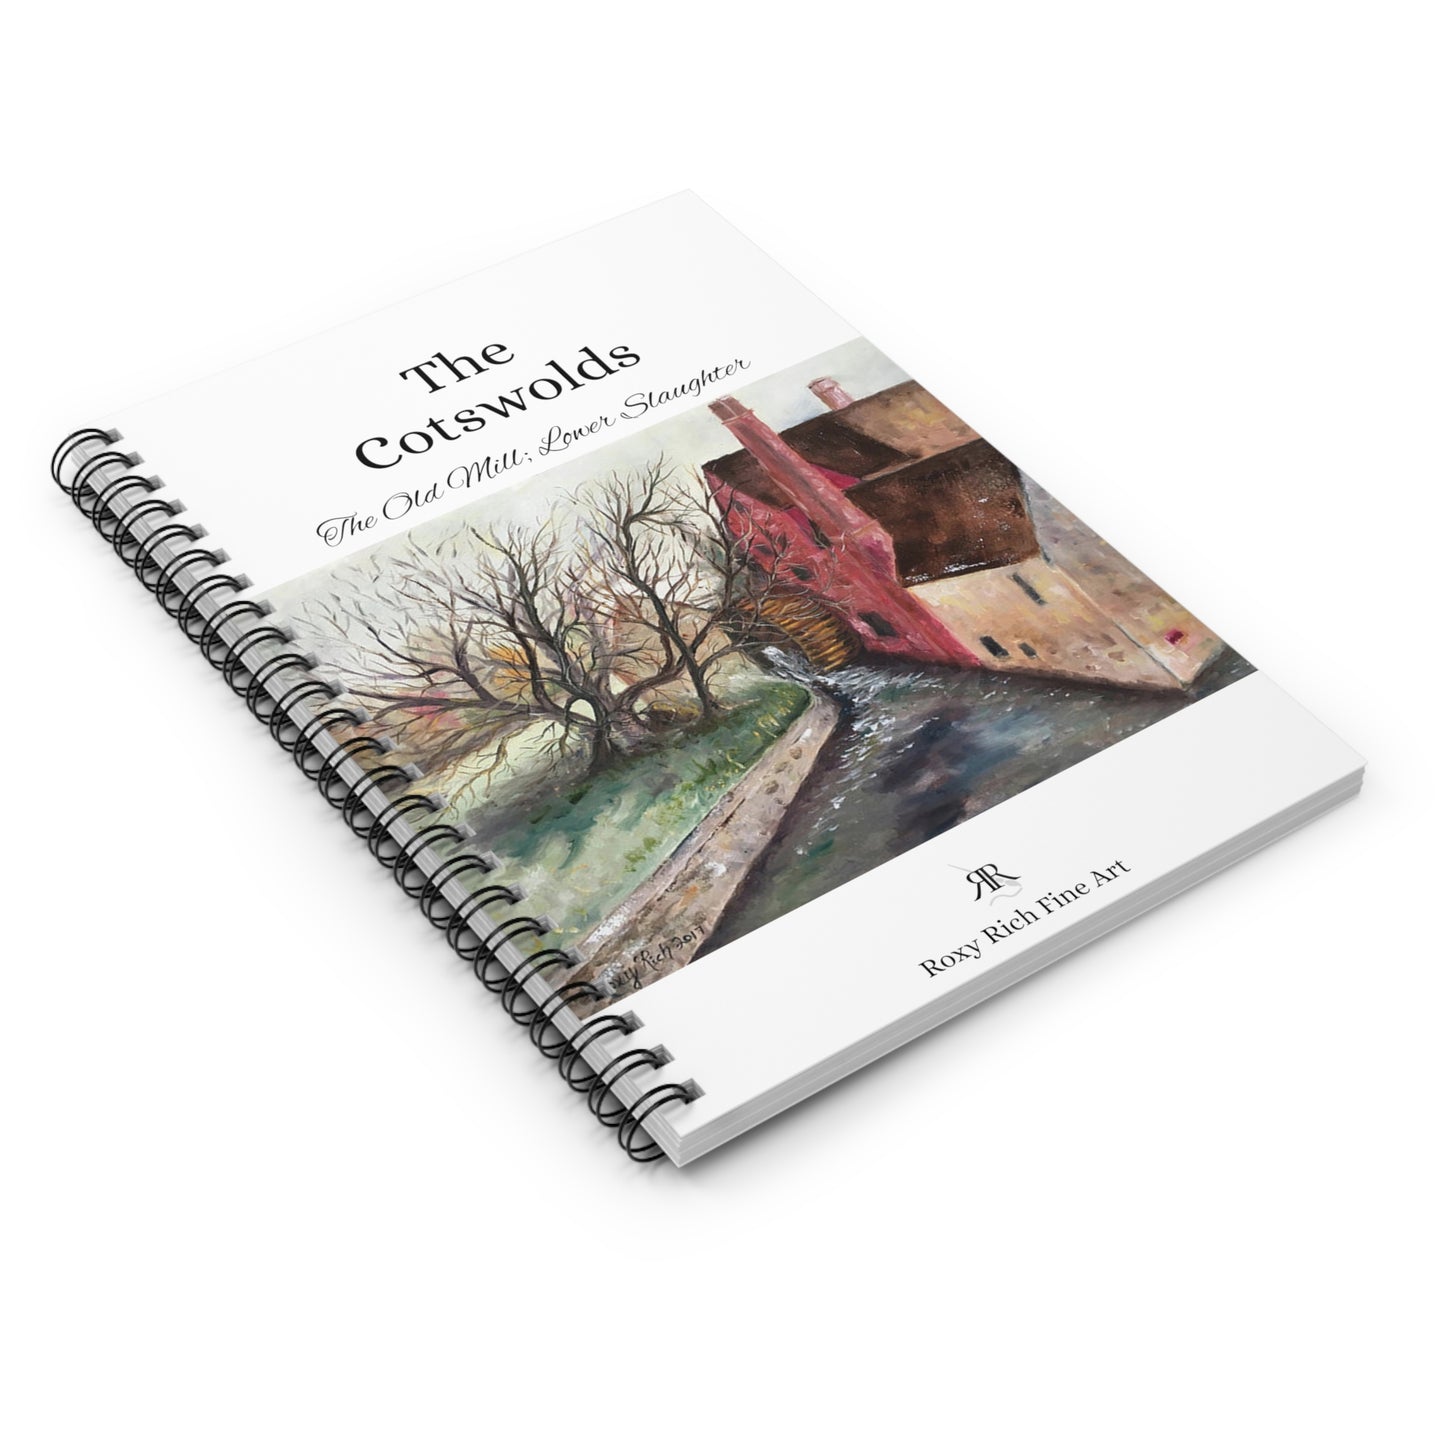 The Old Mill in Lower Slaughter "The Cotswolds" Spiral Notebook